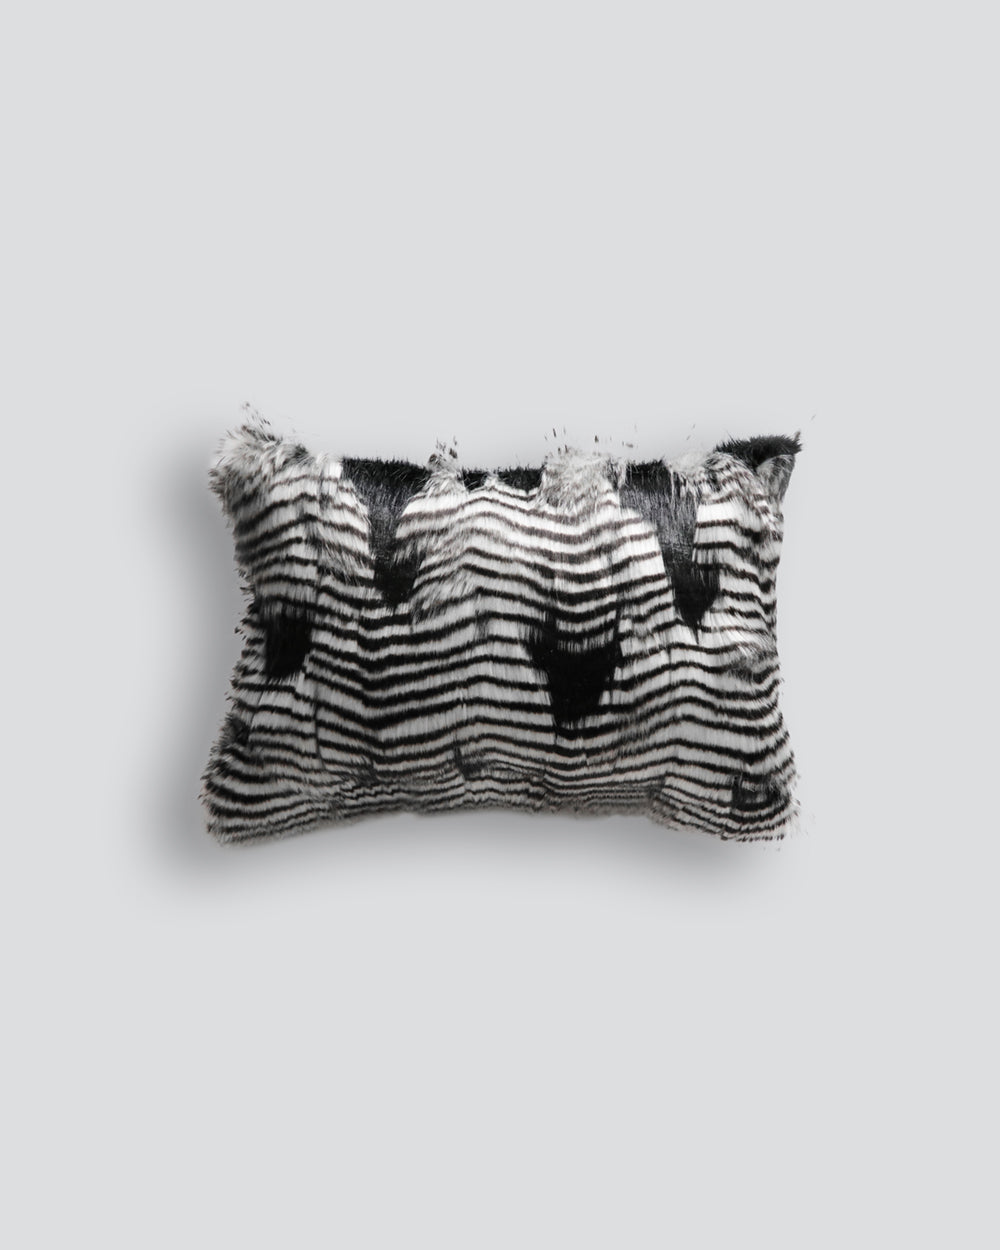 Heirloom Silver Pheasant Cushions in Faux Fur are available from Make Your House A Home Premium Stockist. Furniture Store Bendigo, Victoria. Australia Wide Delivery. Furtex Baya.